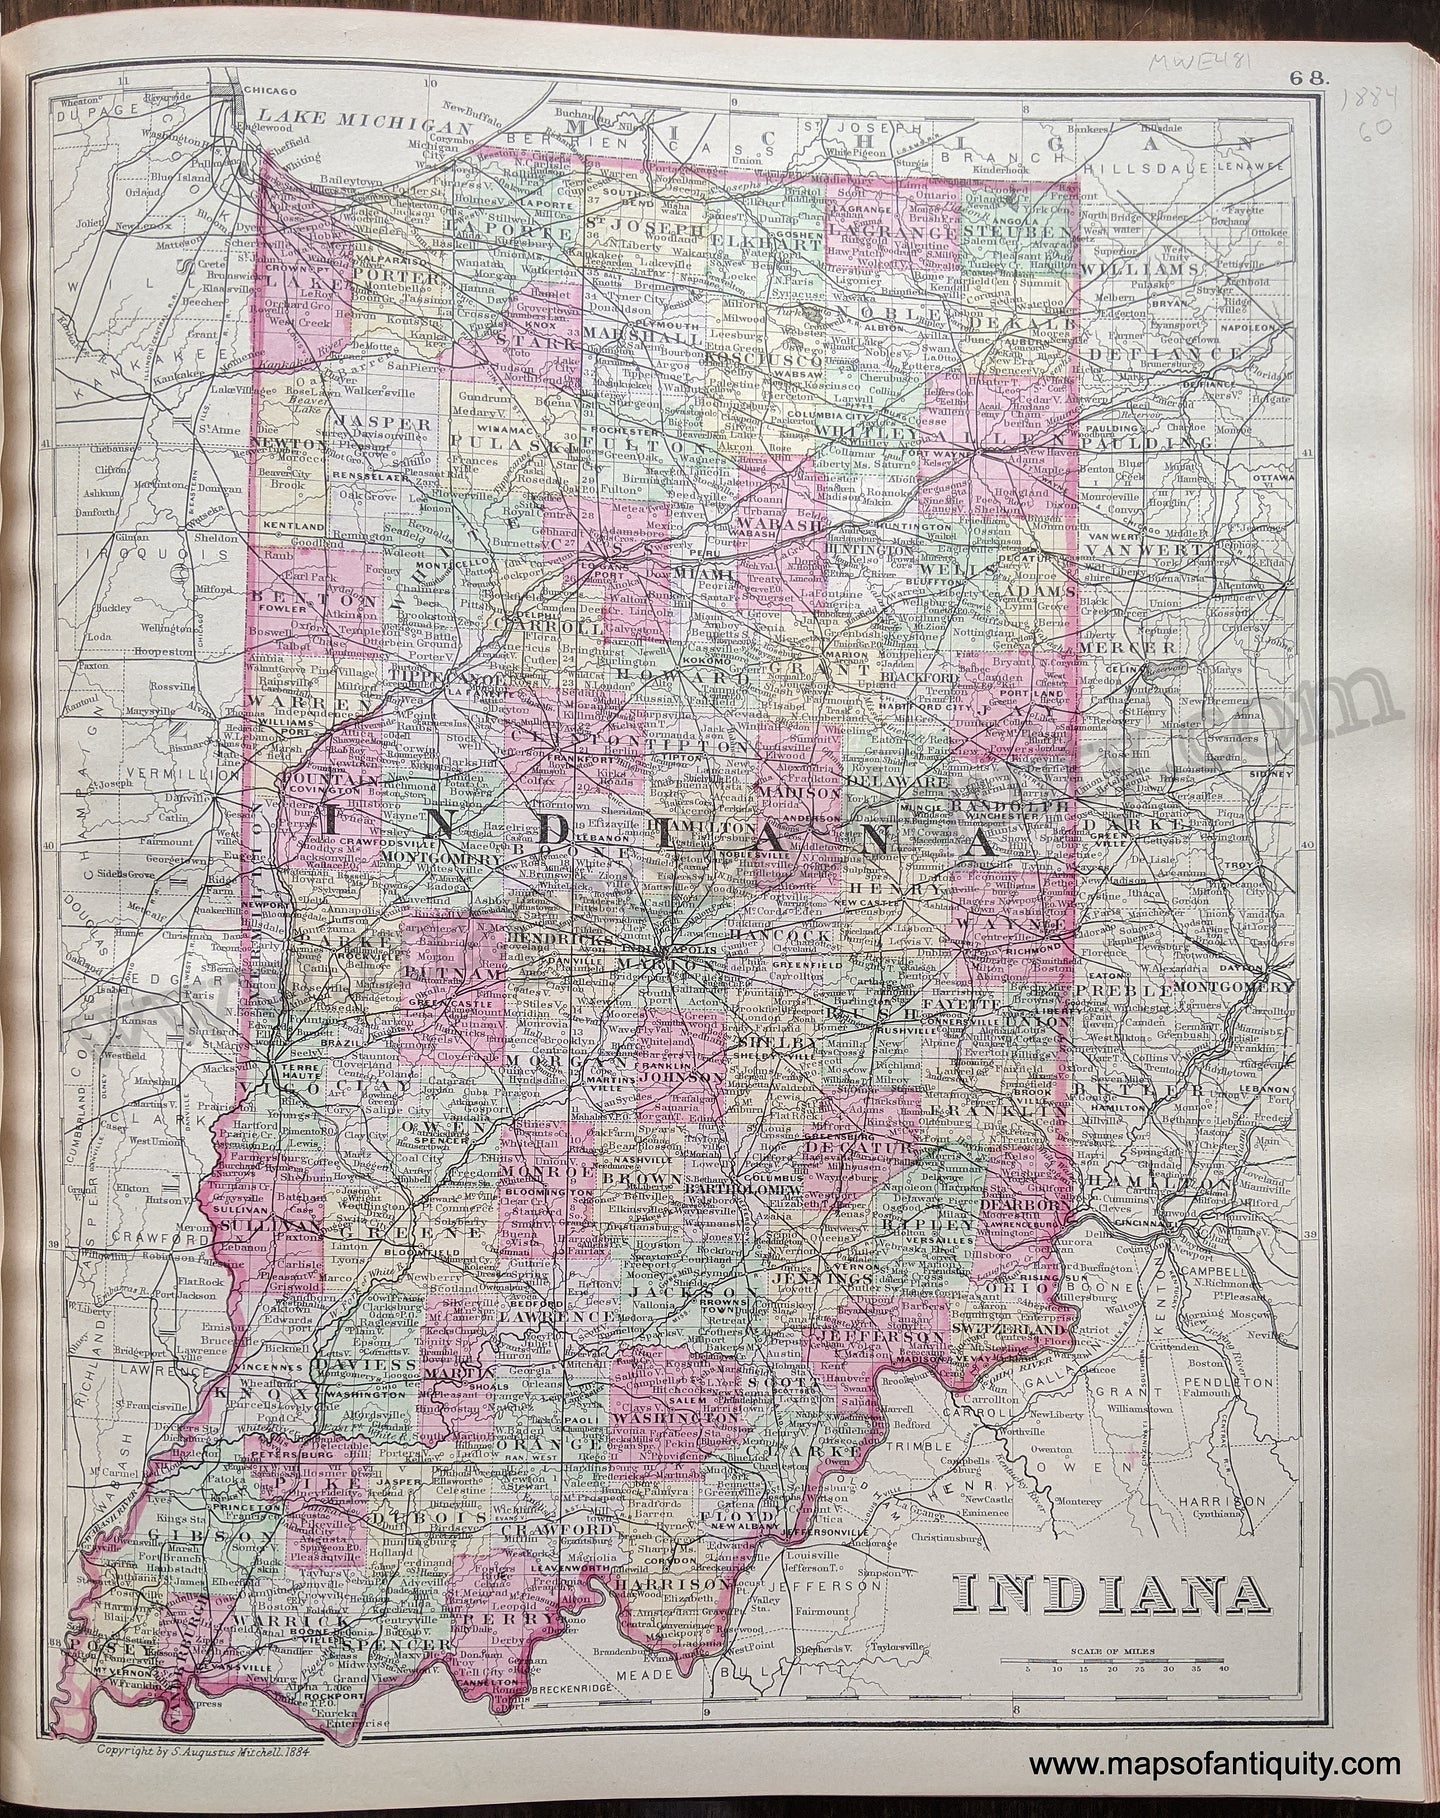 Antique-Hand-Colored-Map-Indiana-United-States-Midwest-1884-Mitchell-Maps-Of-Antiquity-1800s-19th-century